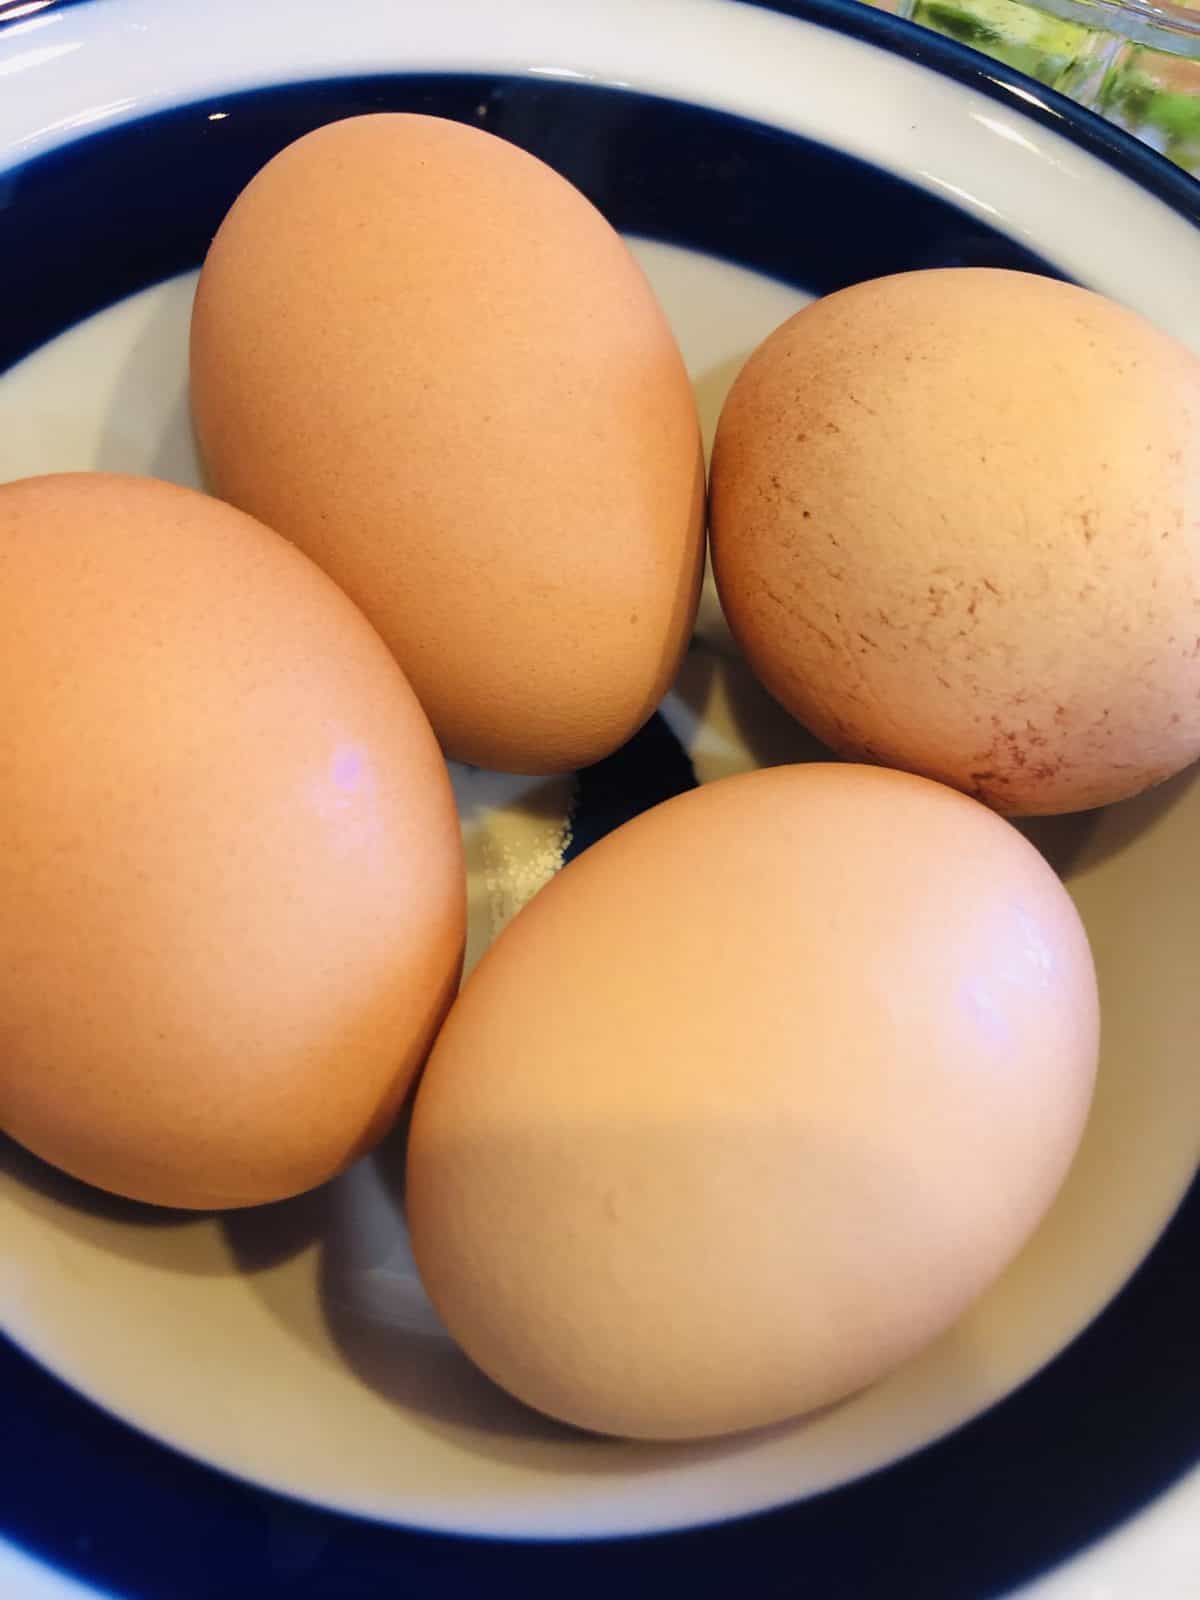 4 brown eggs in a blue and white bowl